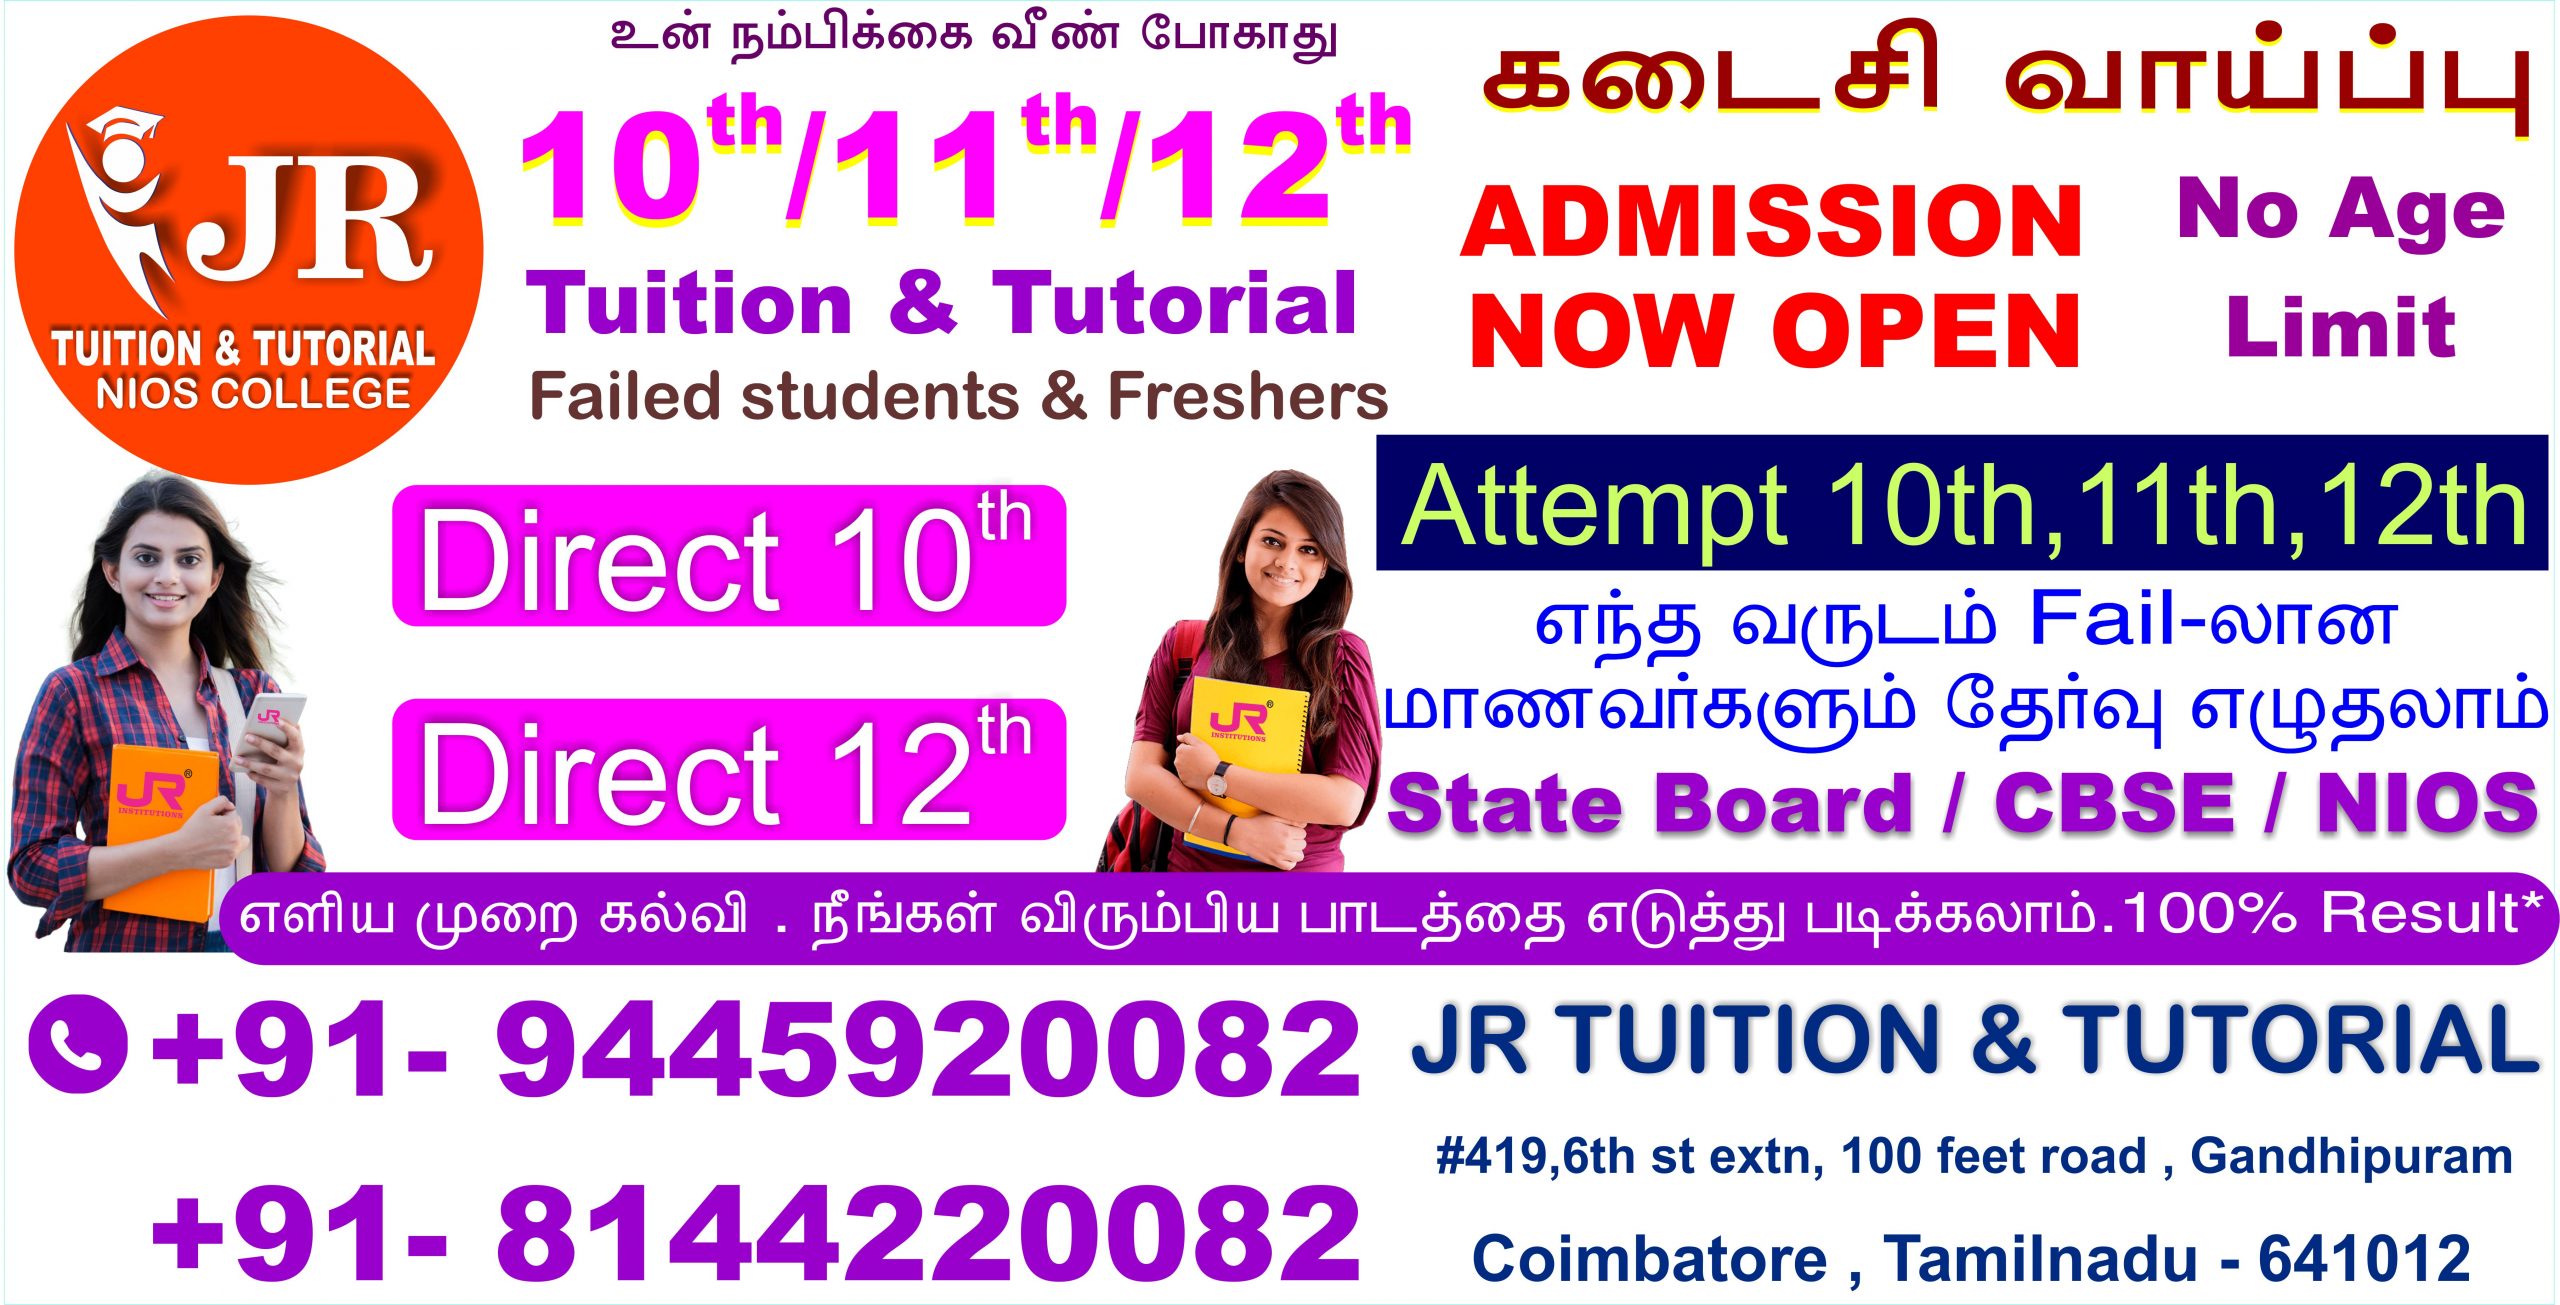 coimbatore best tutorial college and tuition centre near me 10th 11th 12th